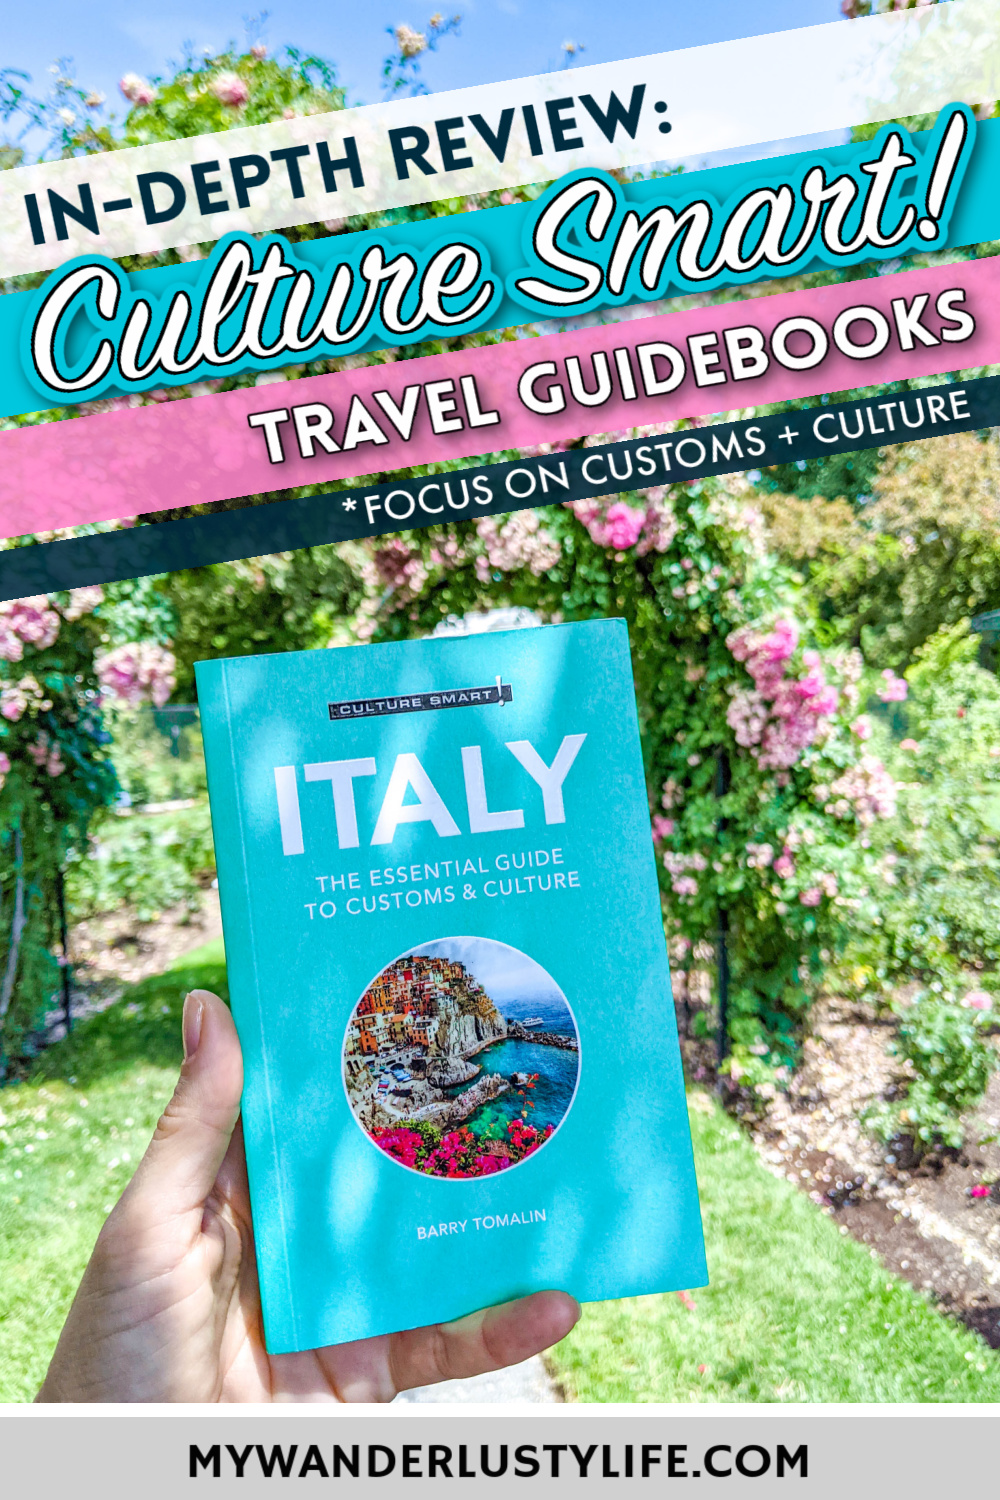 Culture Smart Guides Review: The Best Travel Guidebooks for Your Next Trip | Culture Smart! guidebooks, Culture Smart Italy